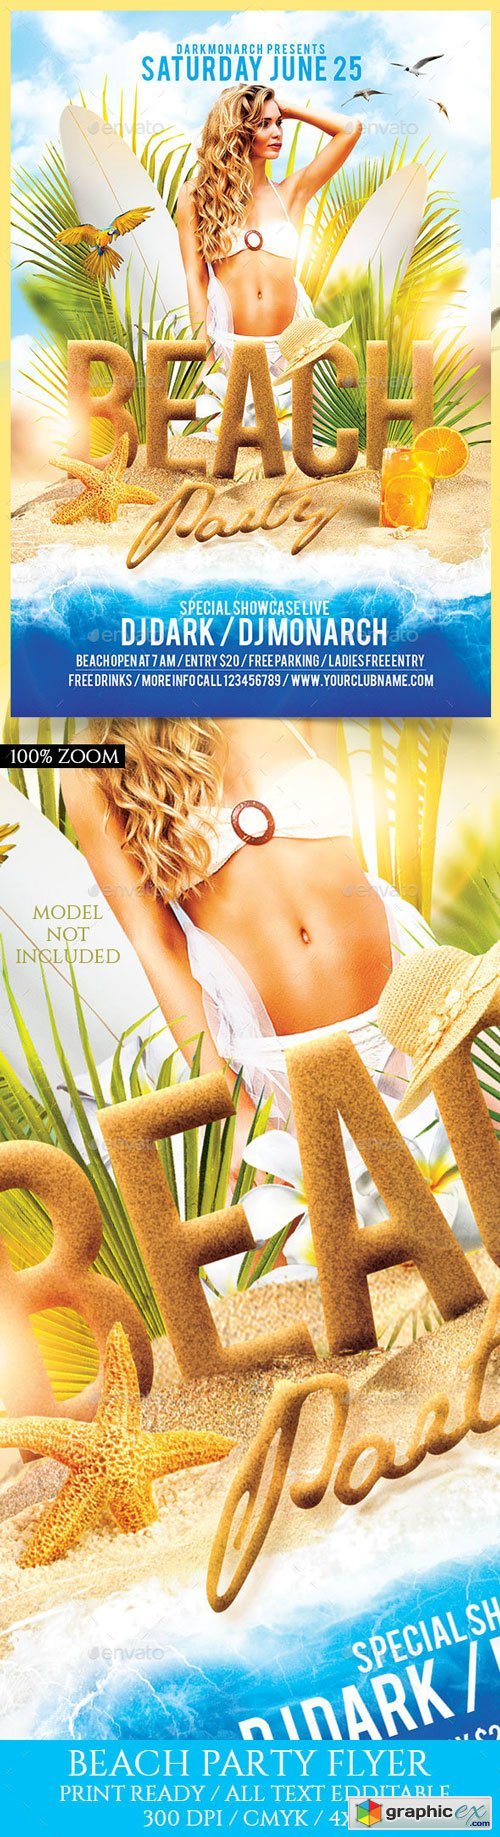 Beach Party Flyer Template 16435179